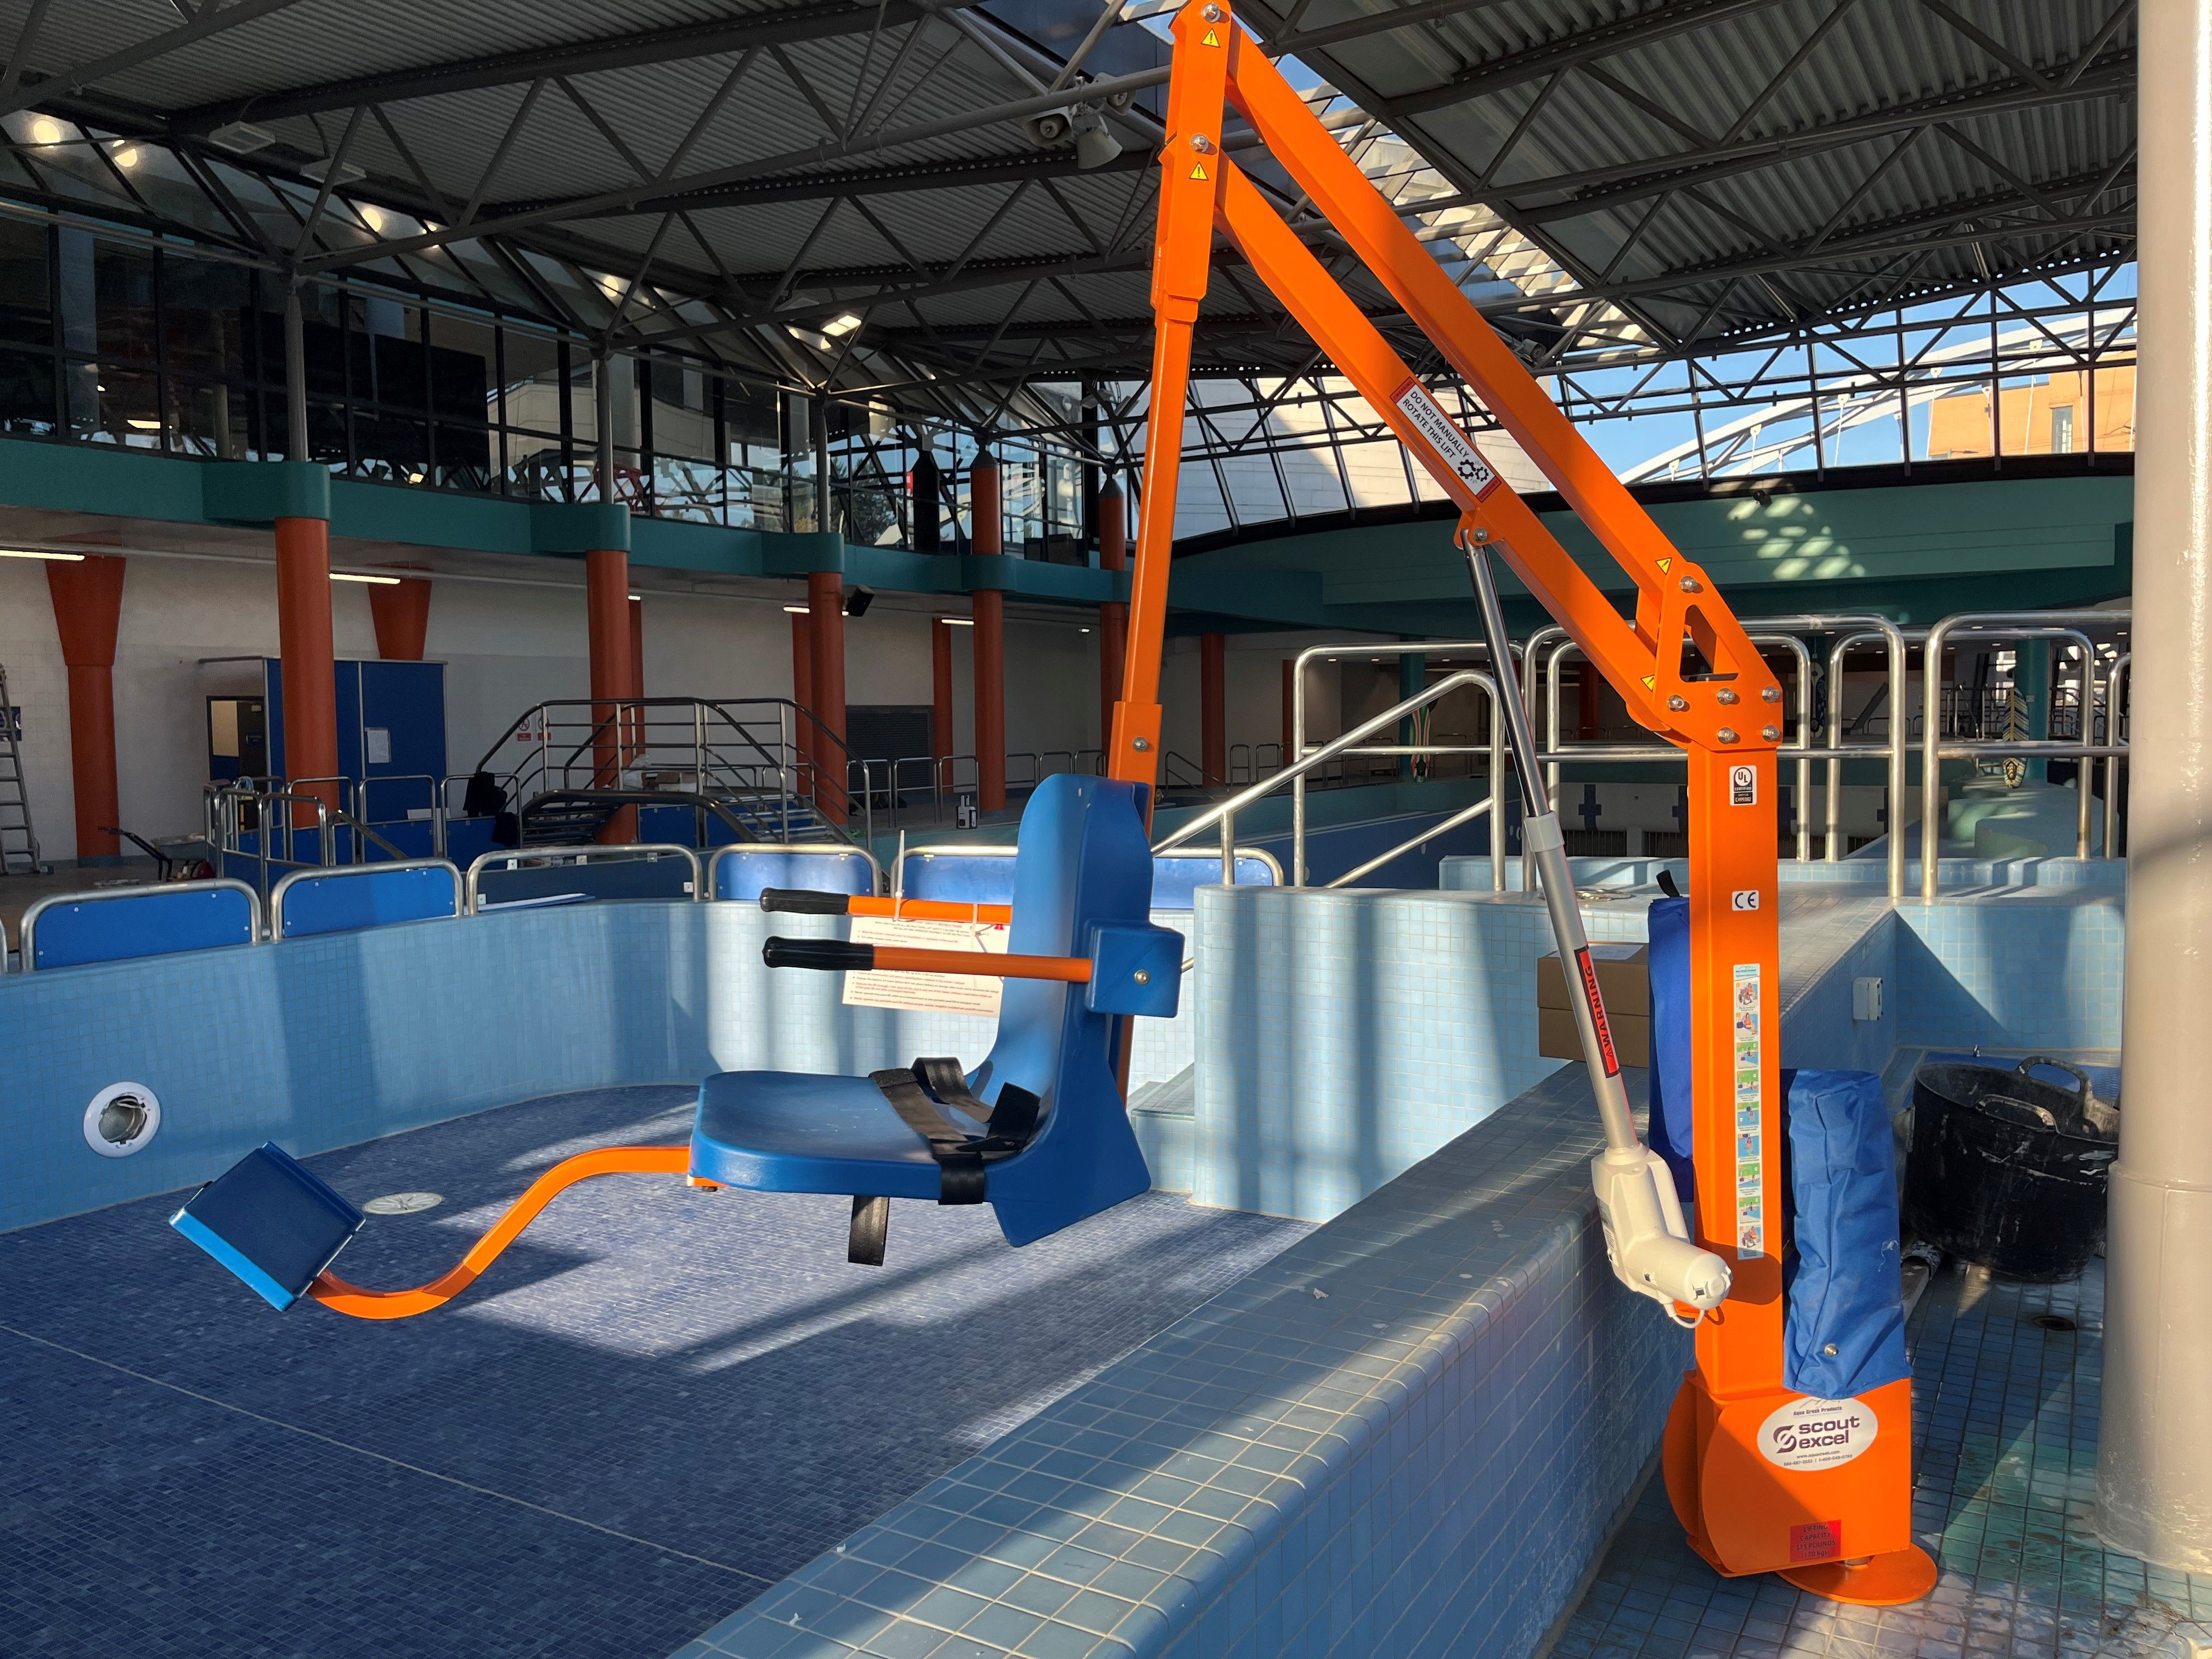 Scout Excel pool lift installed by SUNTRAP SYSTEMS at newly refurbished Ponds Forge swimming complex